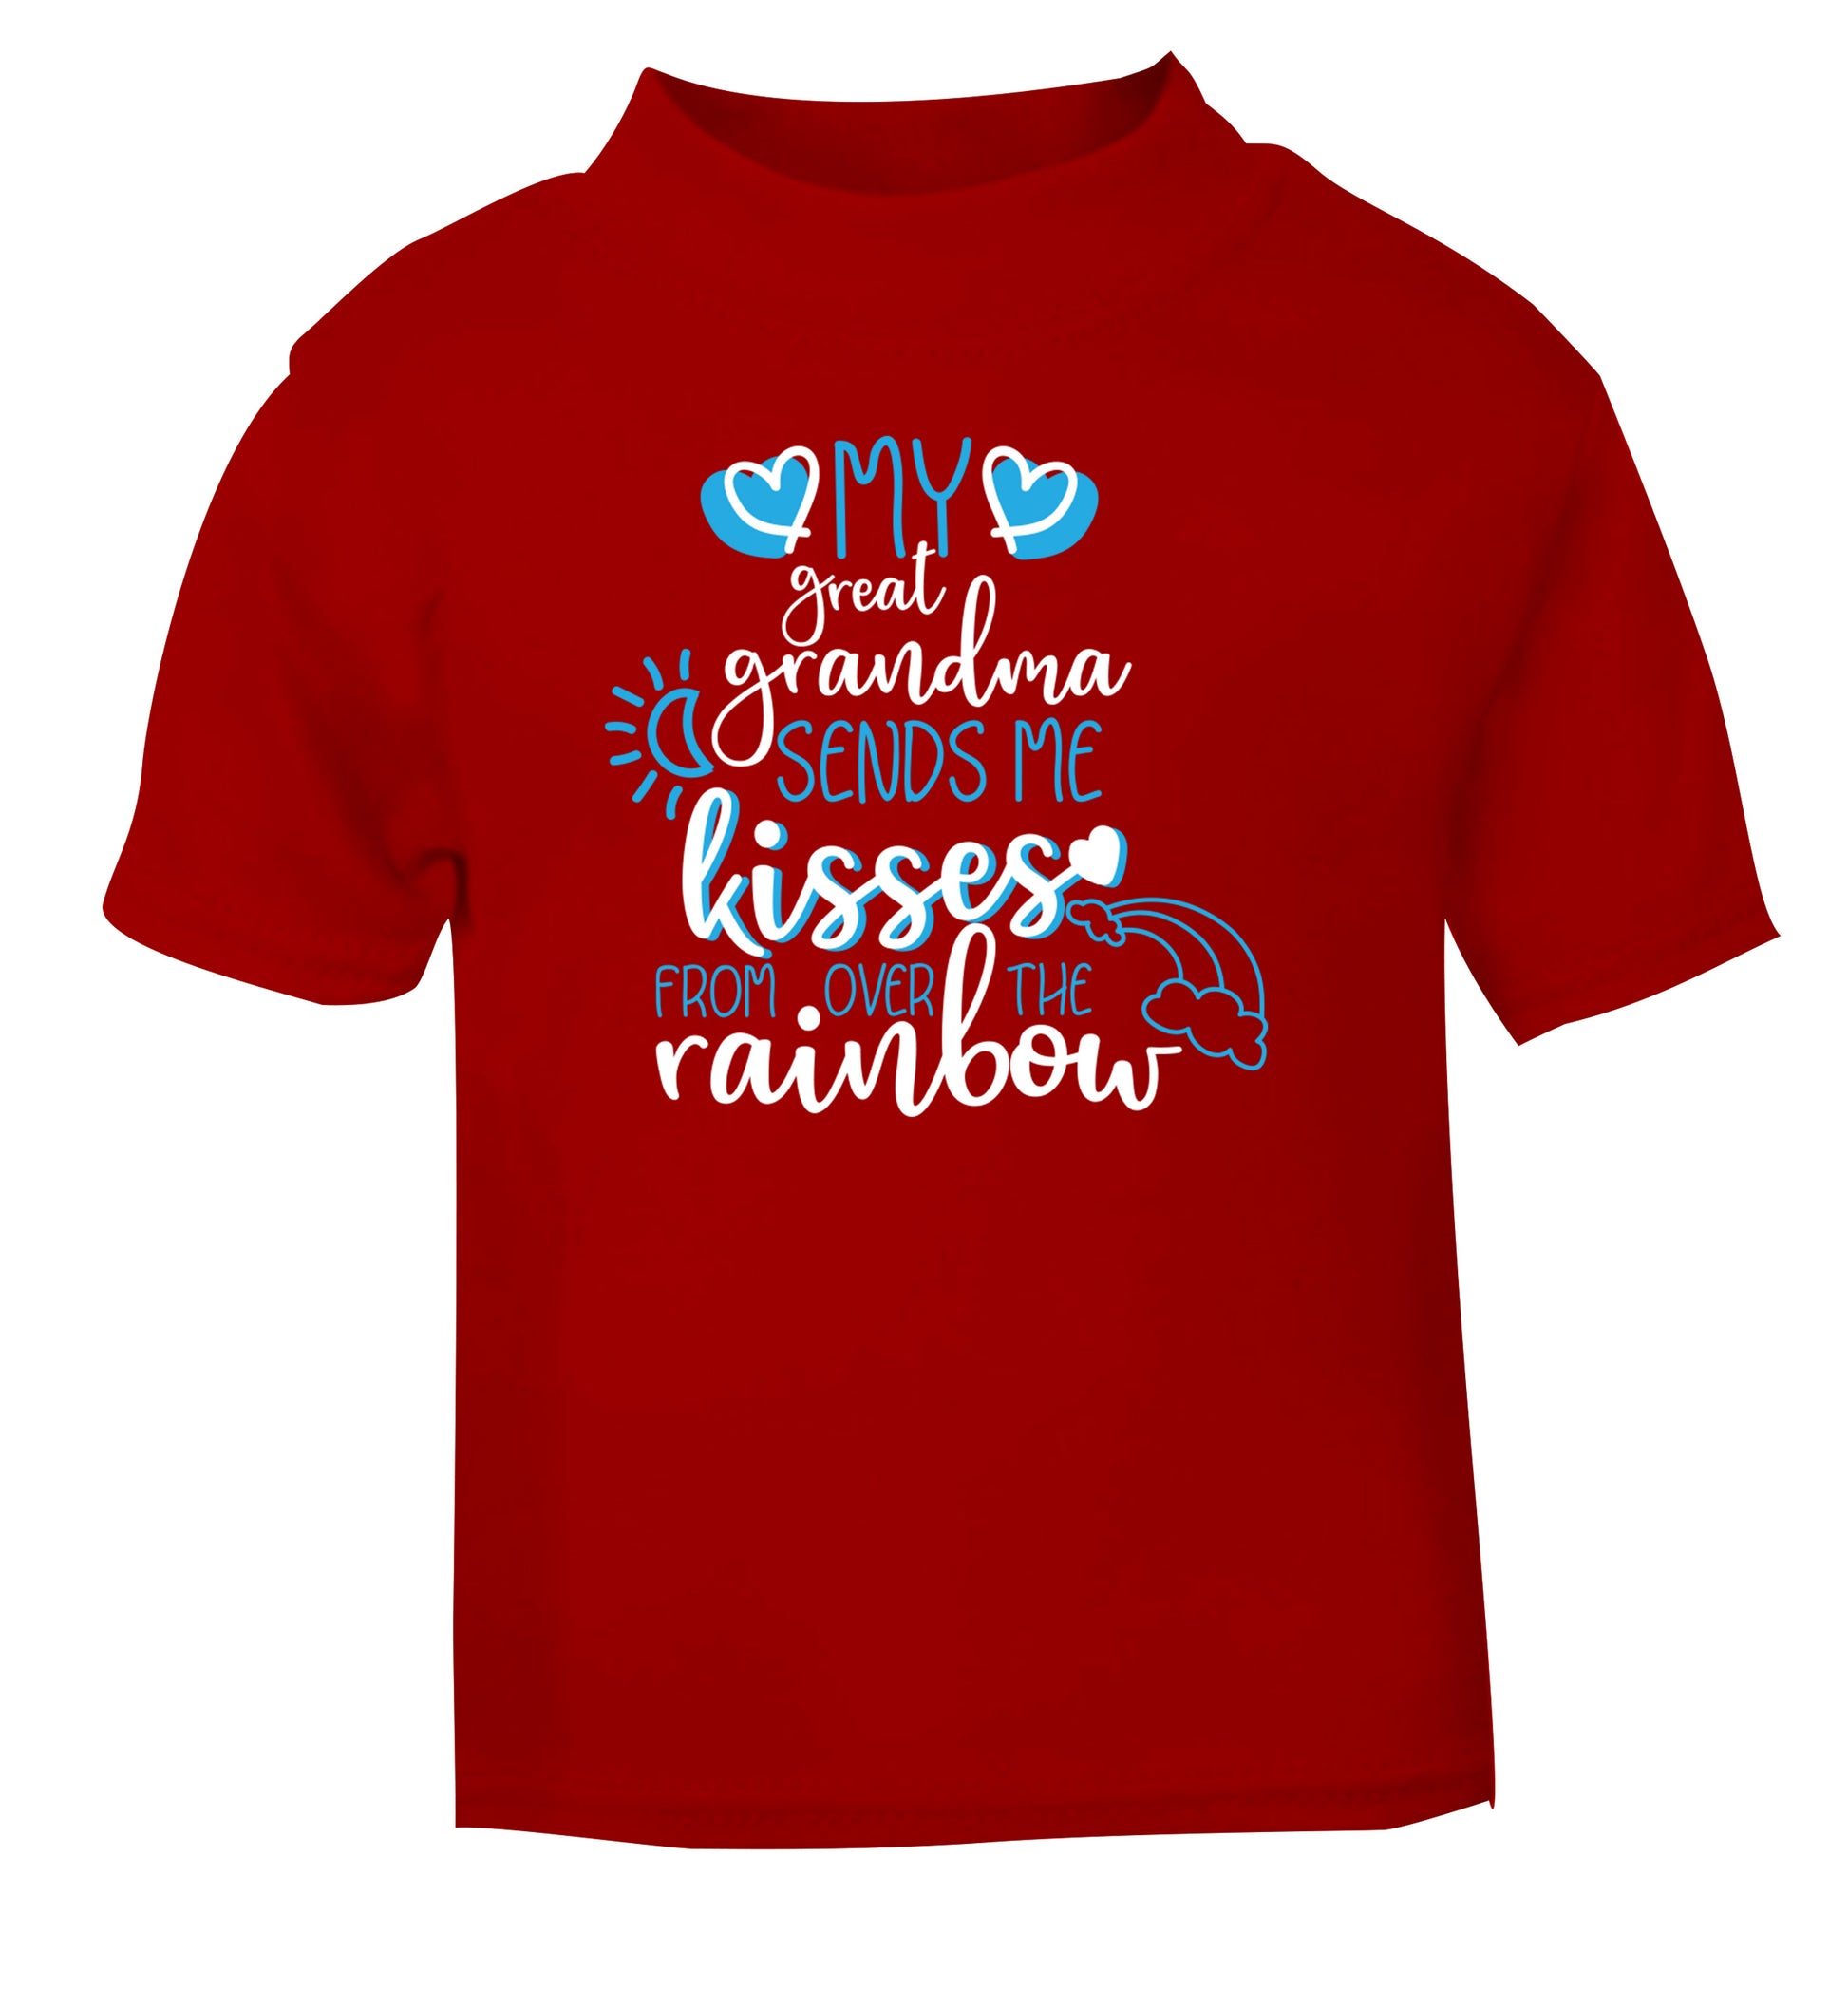 My great grandma sends me kisses from over the rainbow red Baby Toddler Tshirt 2 Years